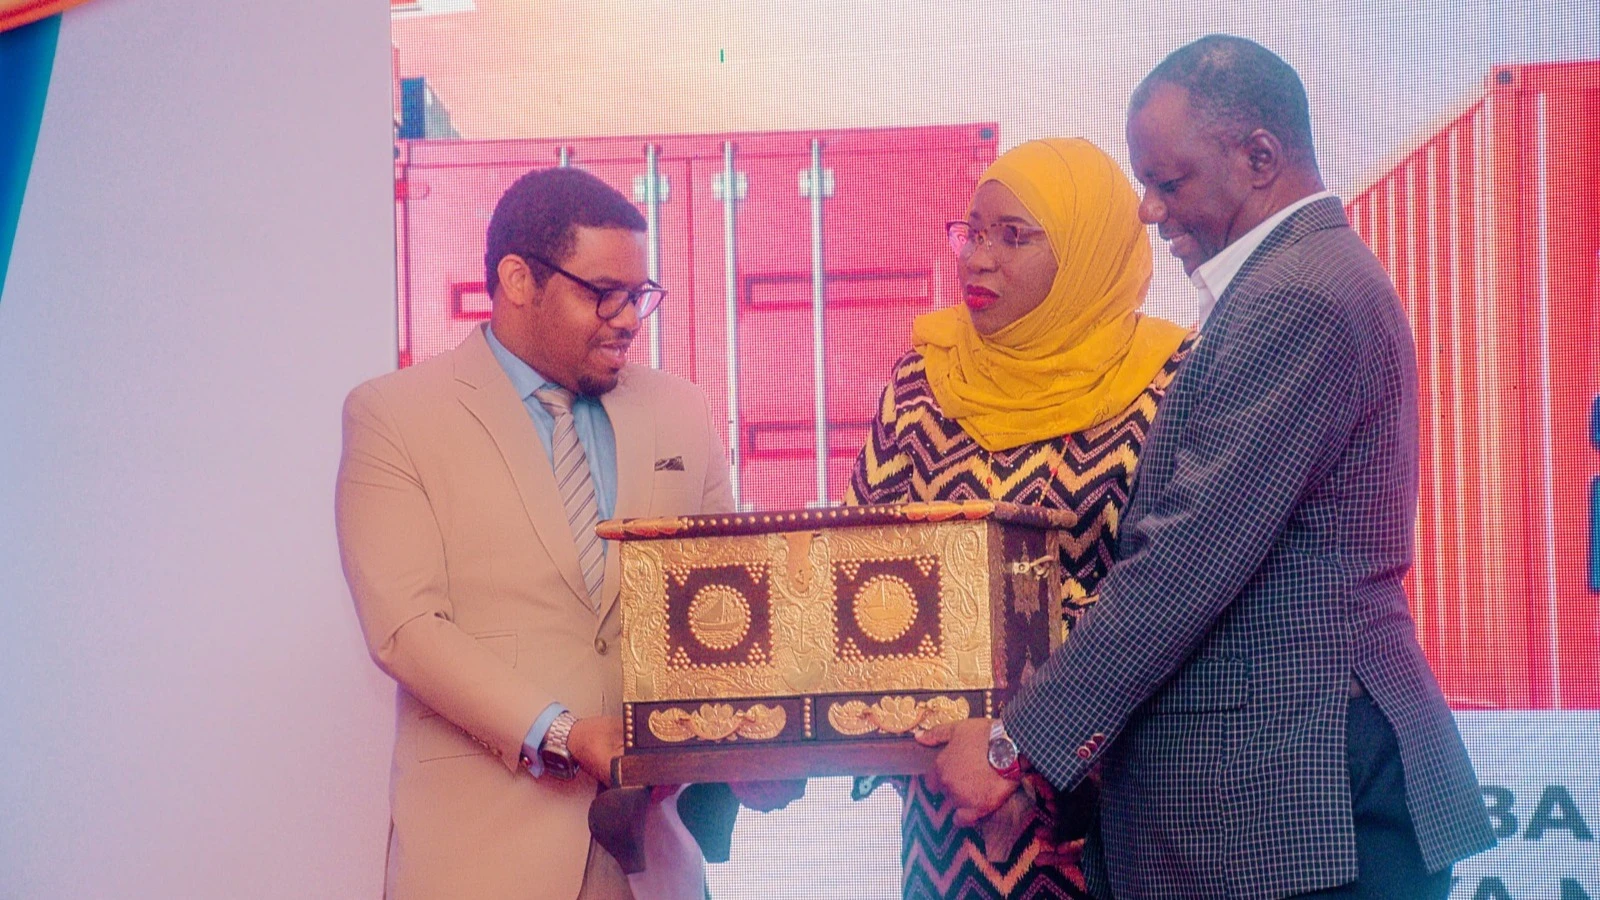 
Joseph Meza (R), PBZ Board Chairman, and Arafat Haji (L), the banks Managing Director, present a special gift to Khadija Said (C), Tanzania's Deputy Commissioner of Insurance, during the launch of the PBZ's new bancassurance service in Zanzibar yesterday